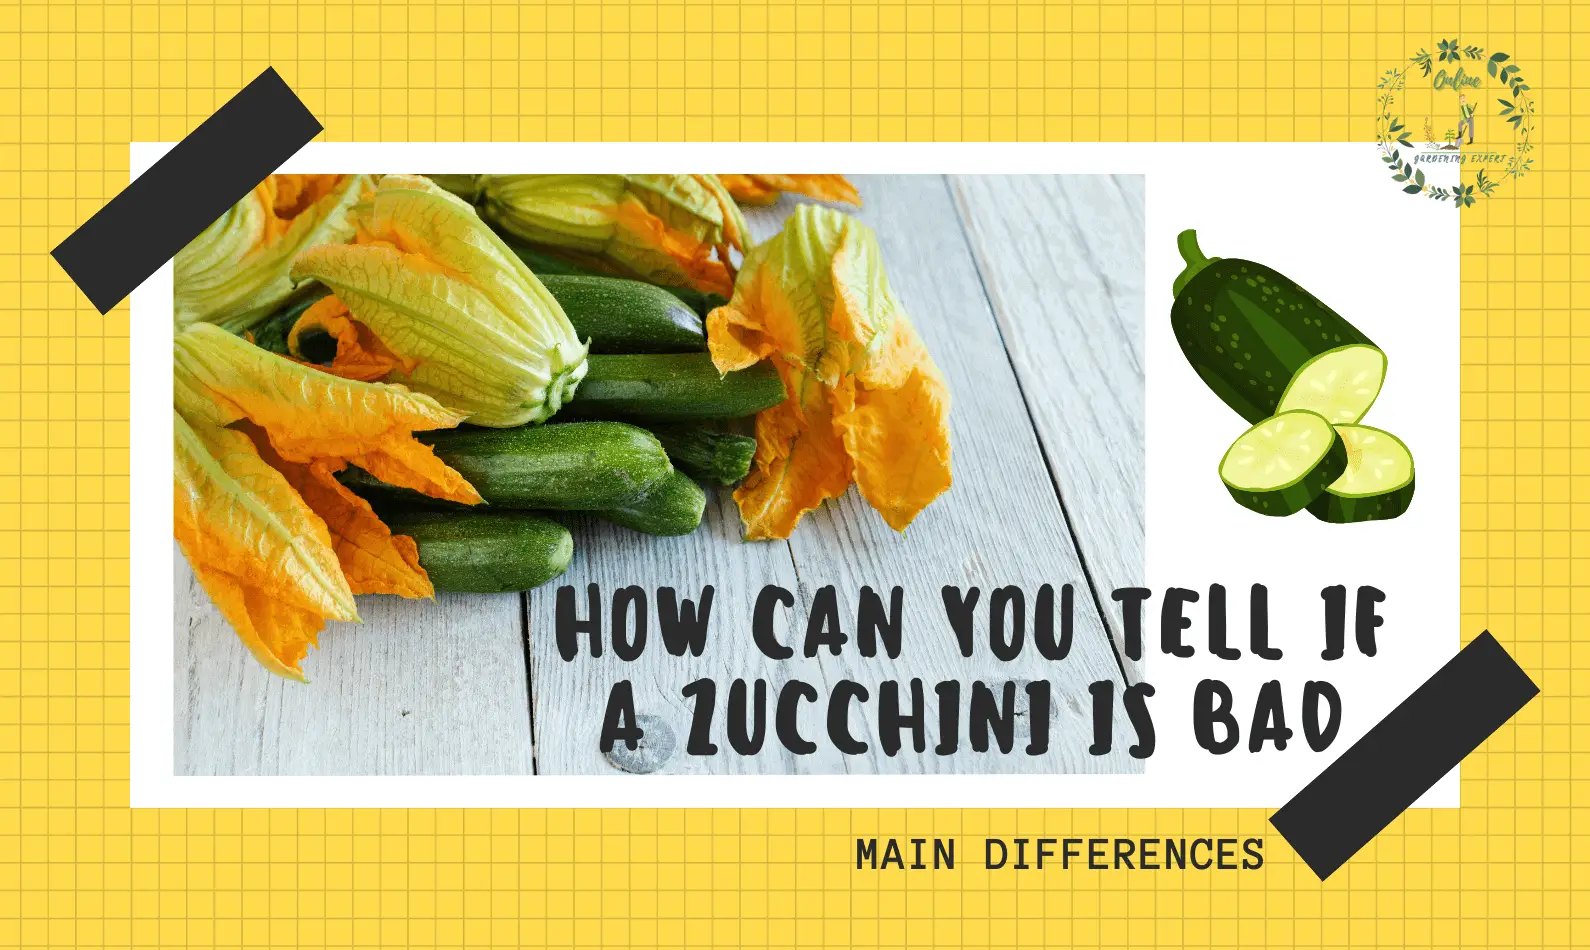 How Can You Tell if a Zucchini is Bad?